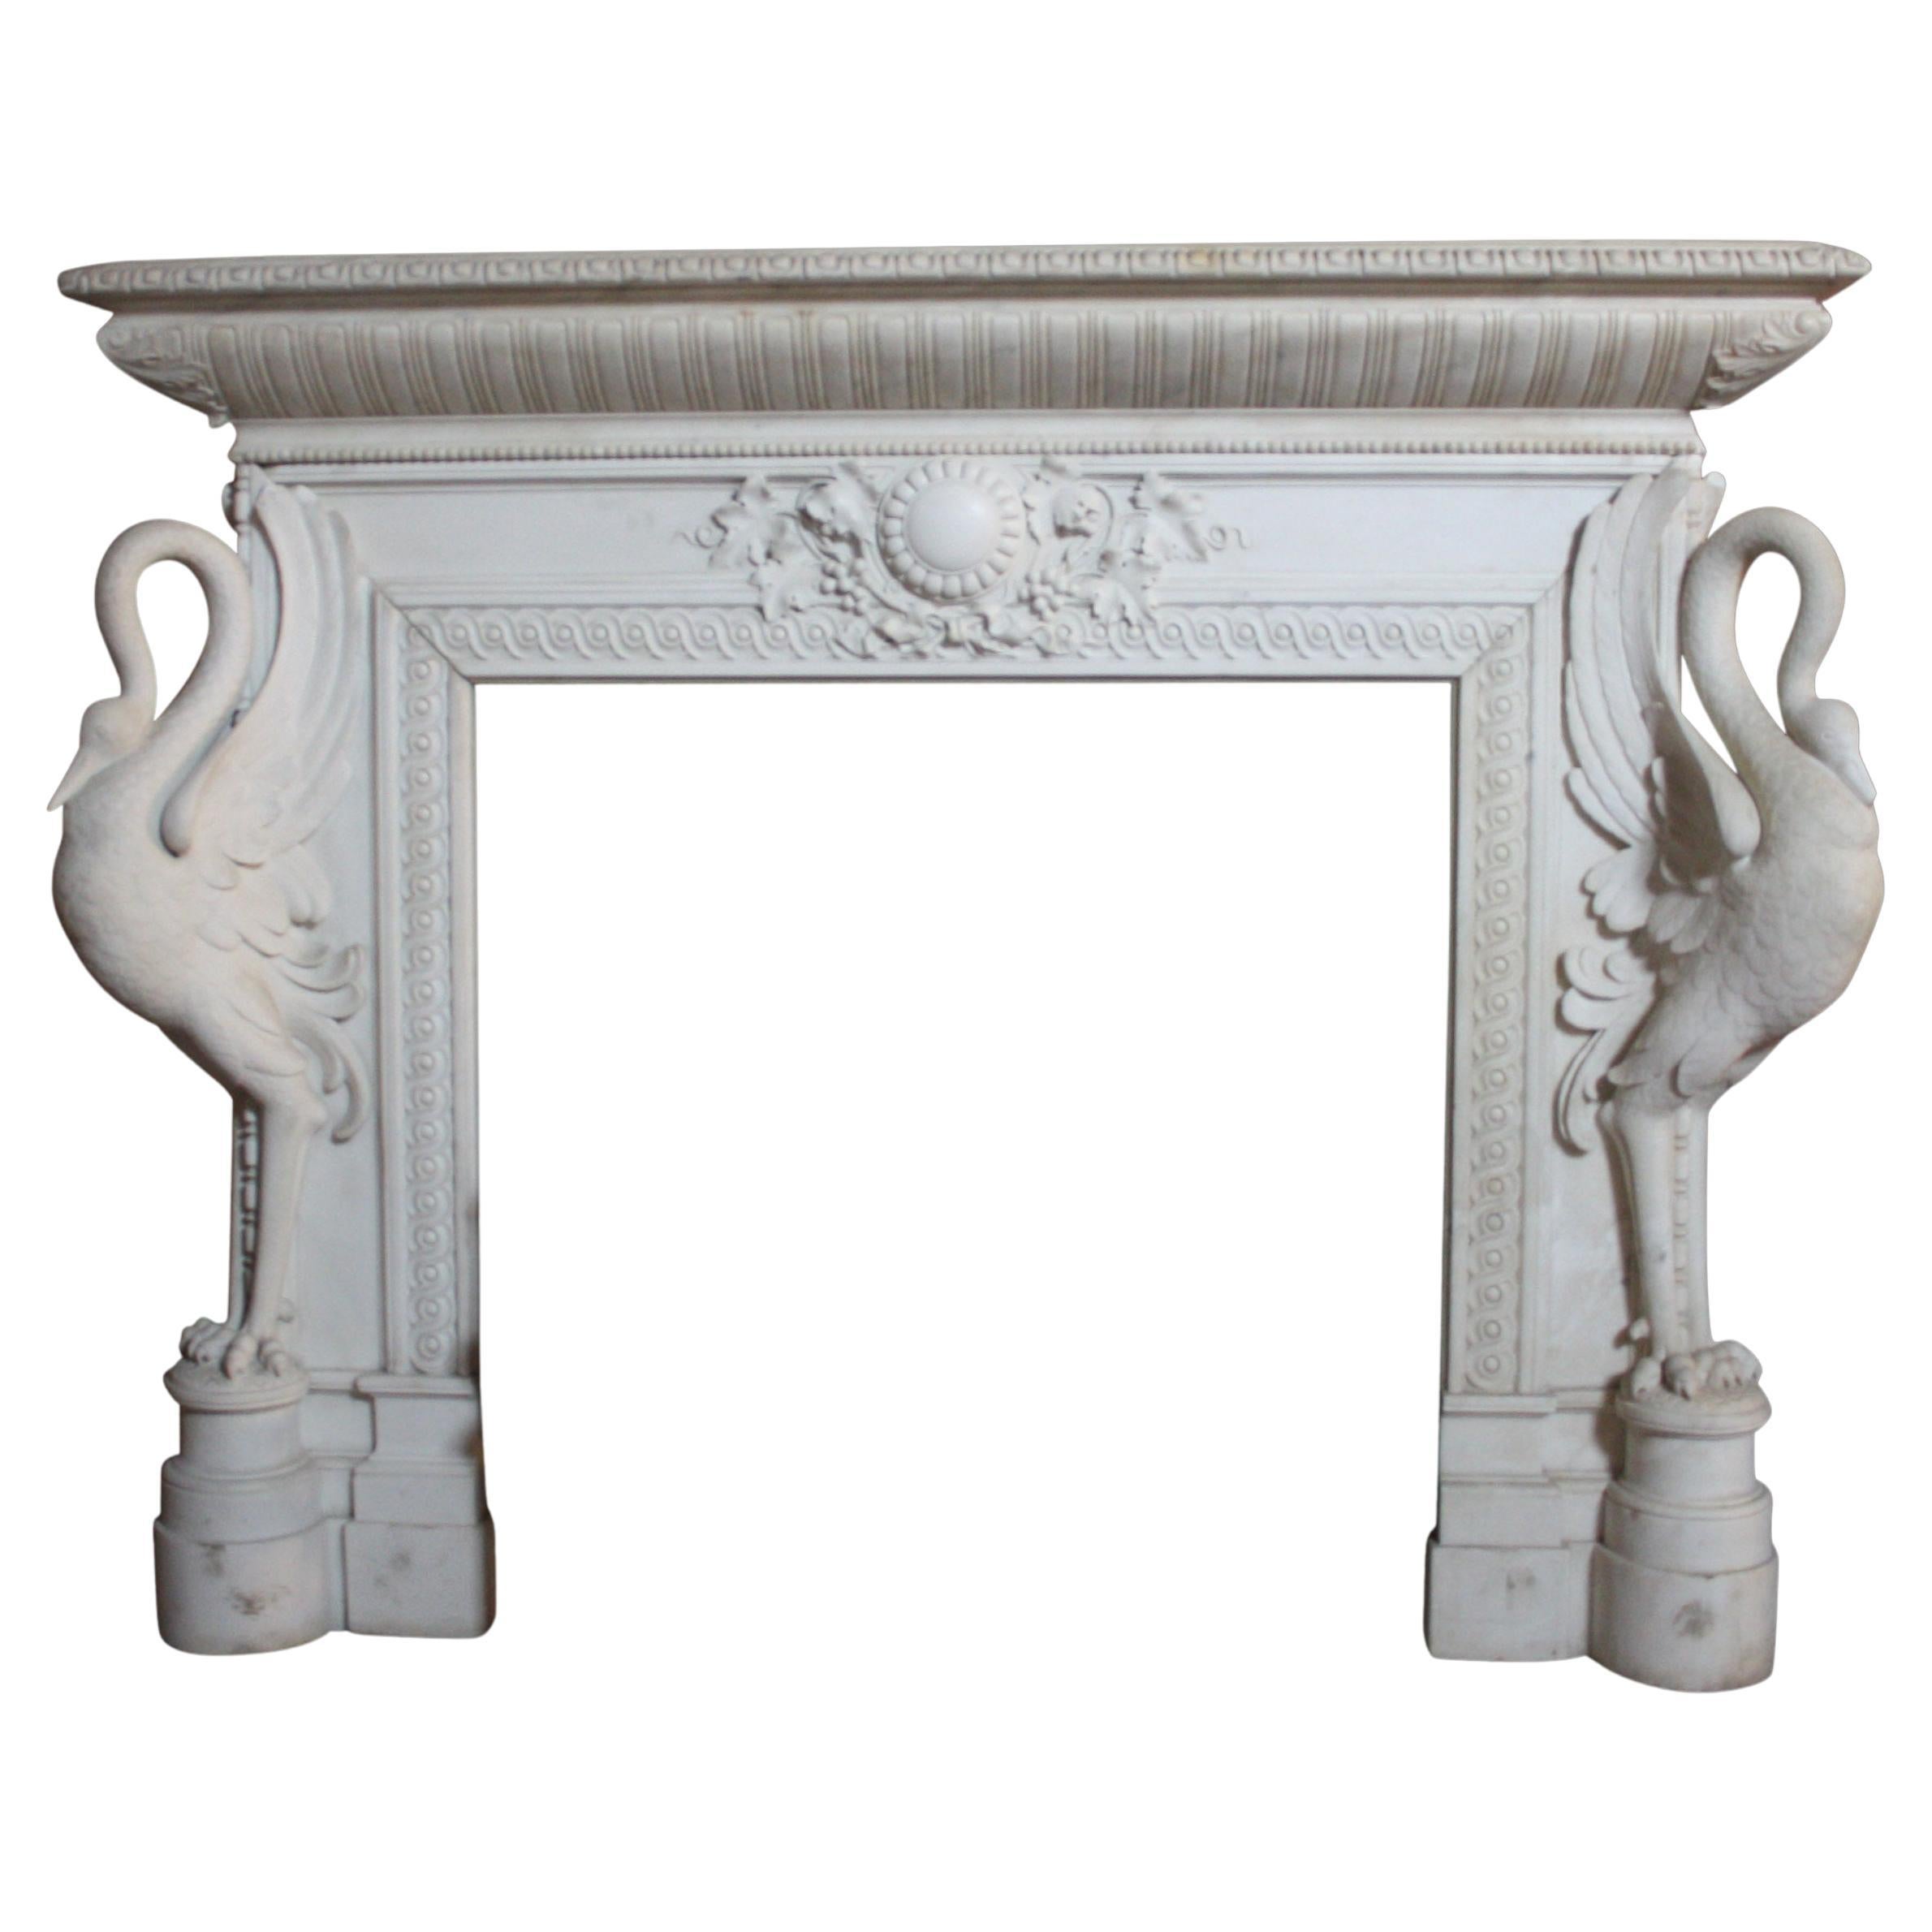 Rare and Exceptional 19th Century Italian Chimneypiece in Statuary Marble